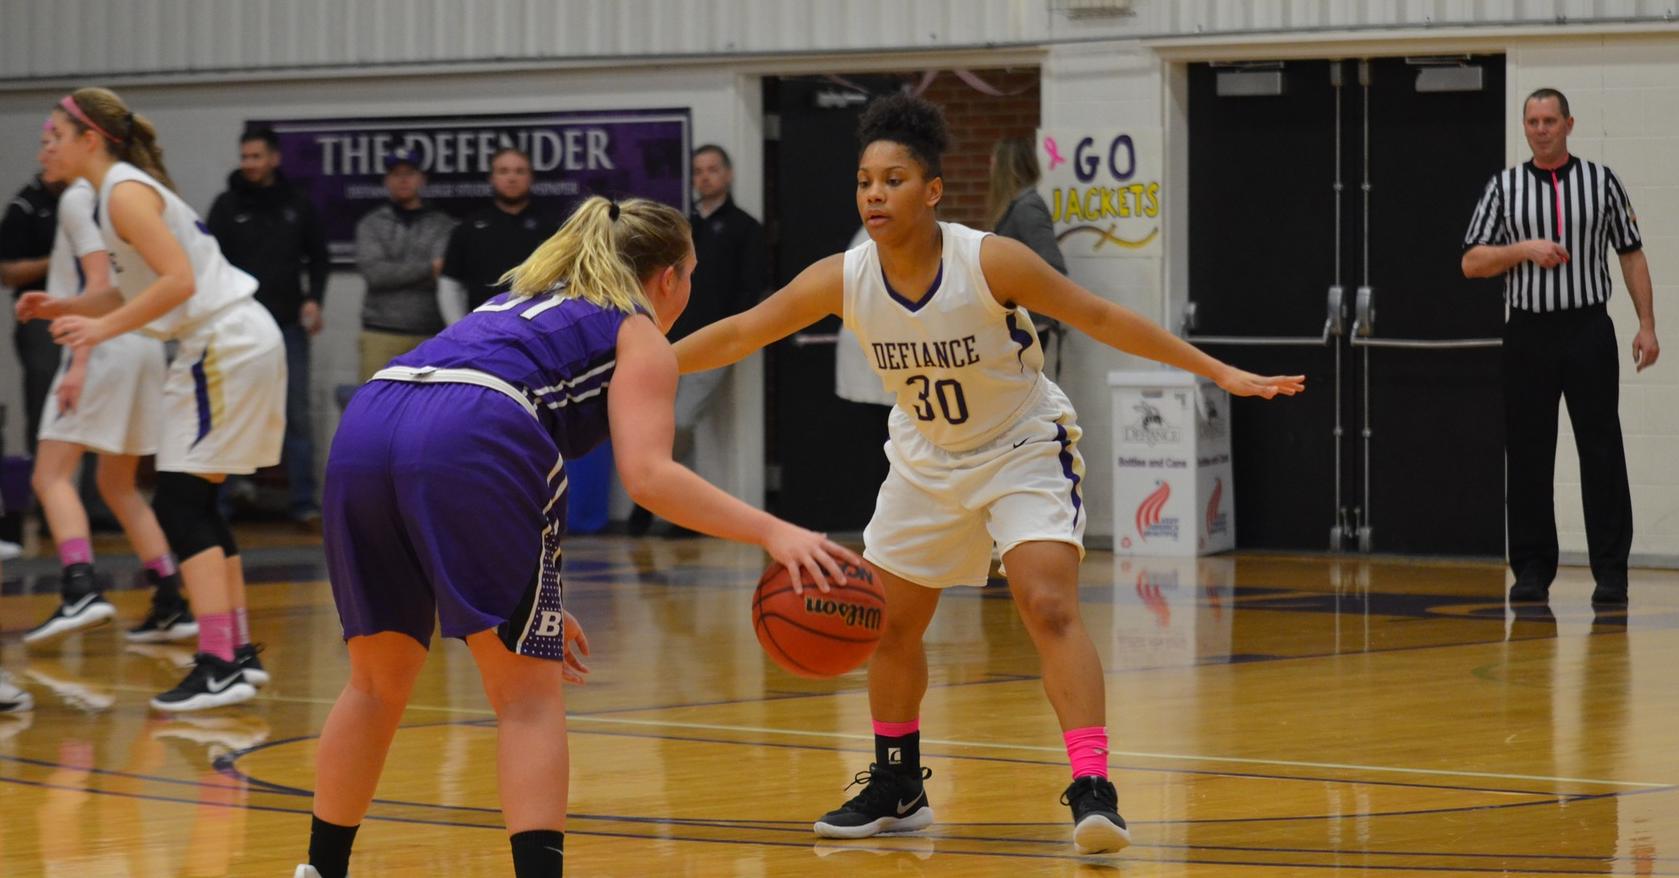 Women's Basketball Struggles in Match-up with Bluffton